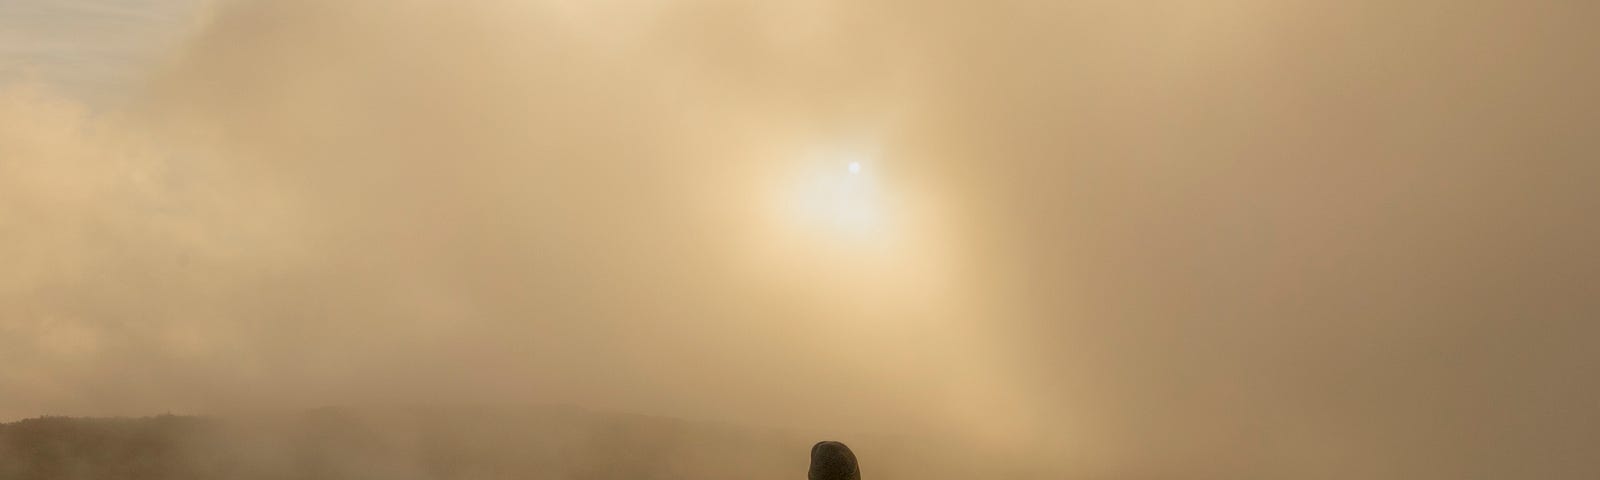 A person sits on a rocky outcropping, their back to the viewer. The air is foggy, the sun filtering through.